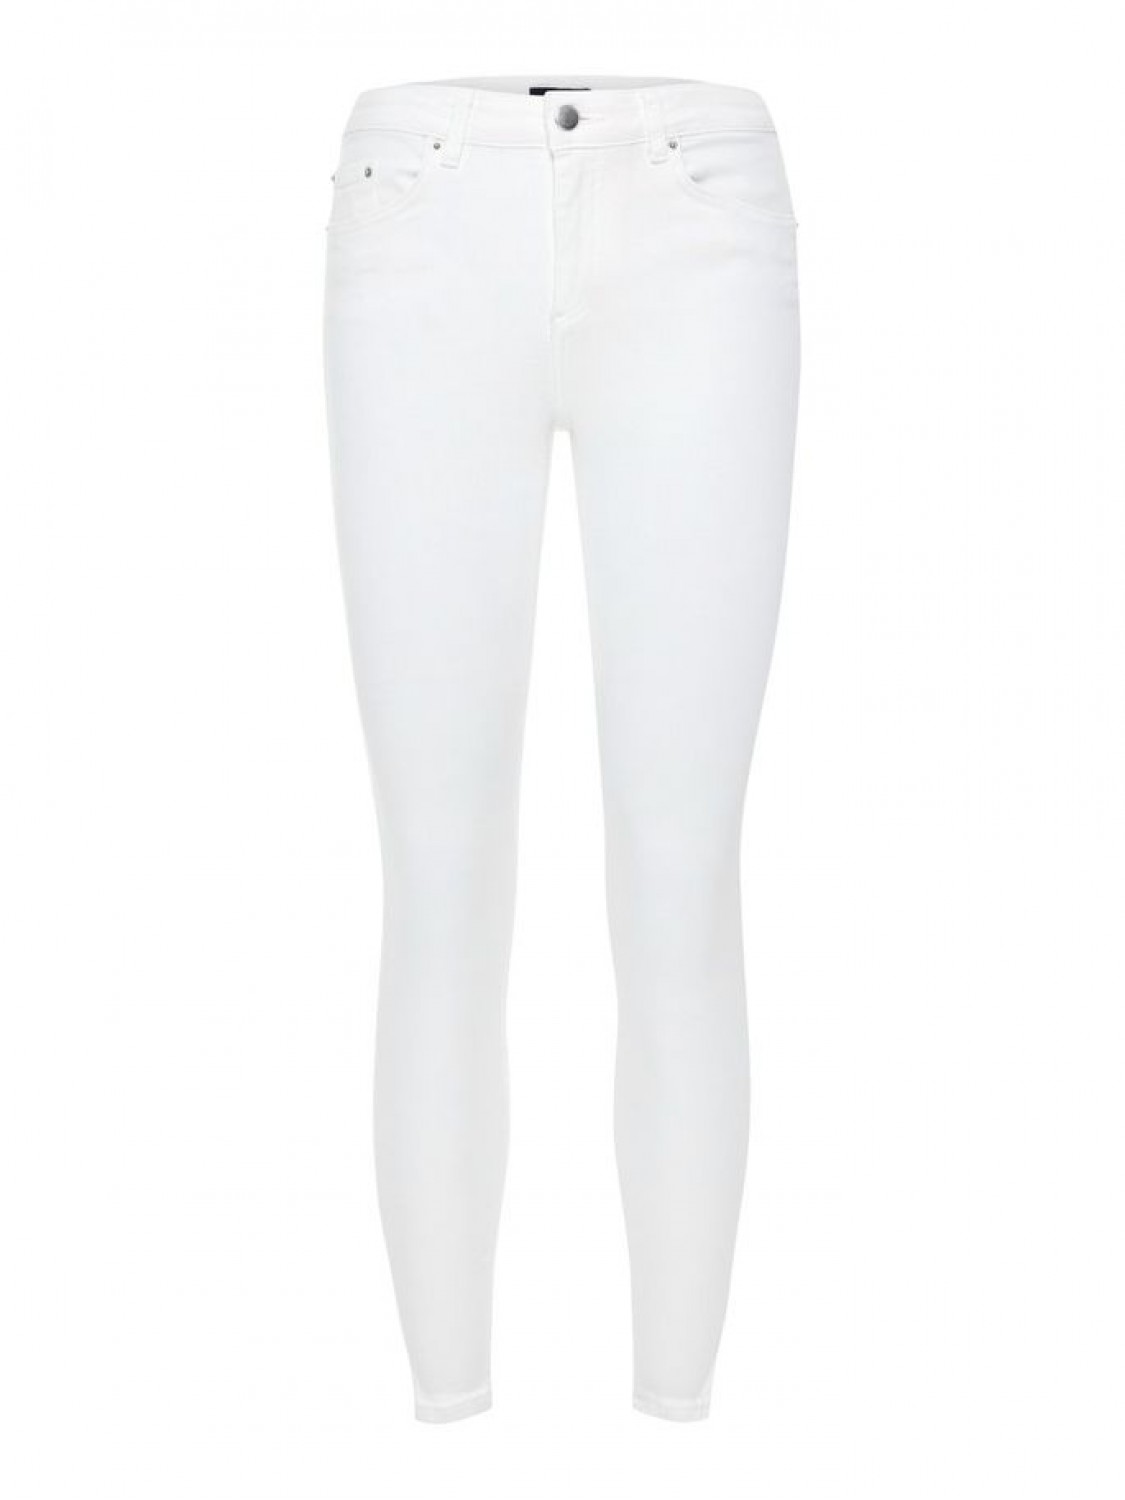 Jeans abertura lateral blancos